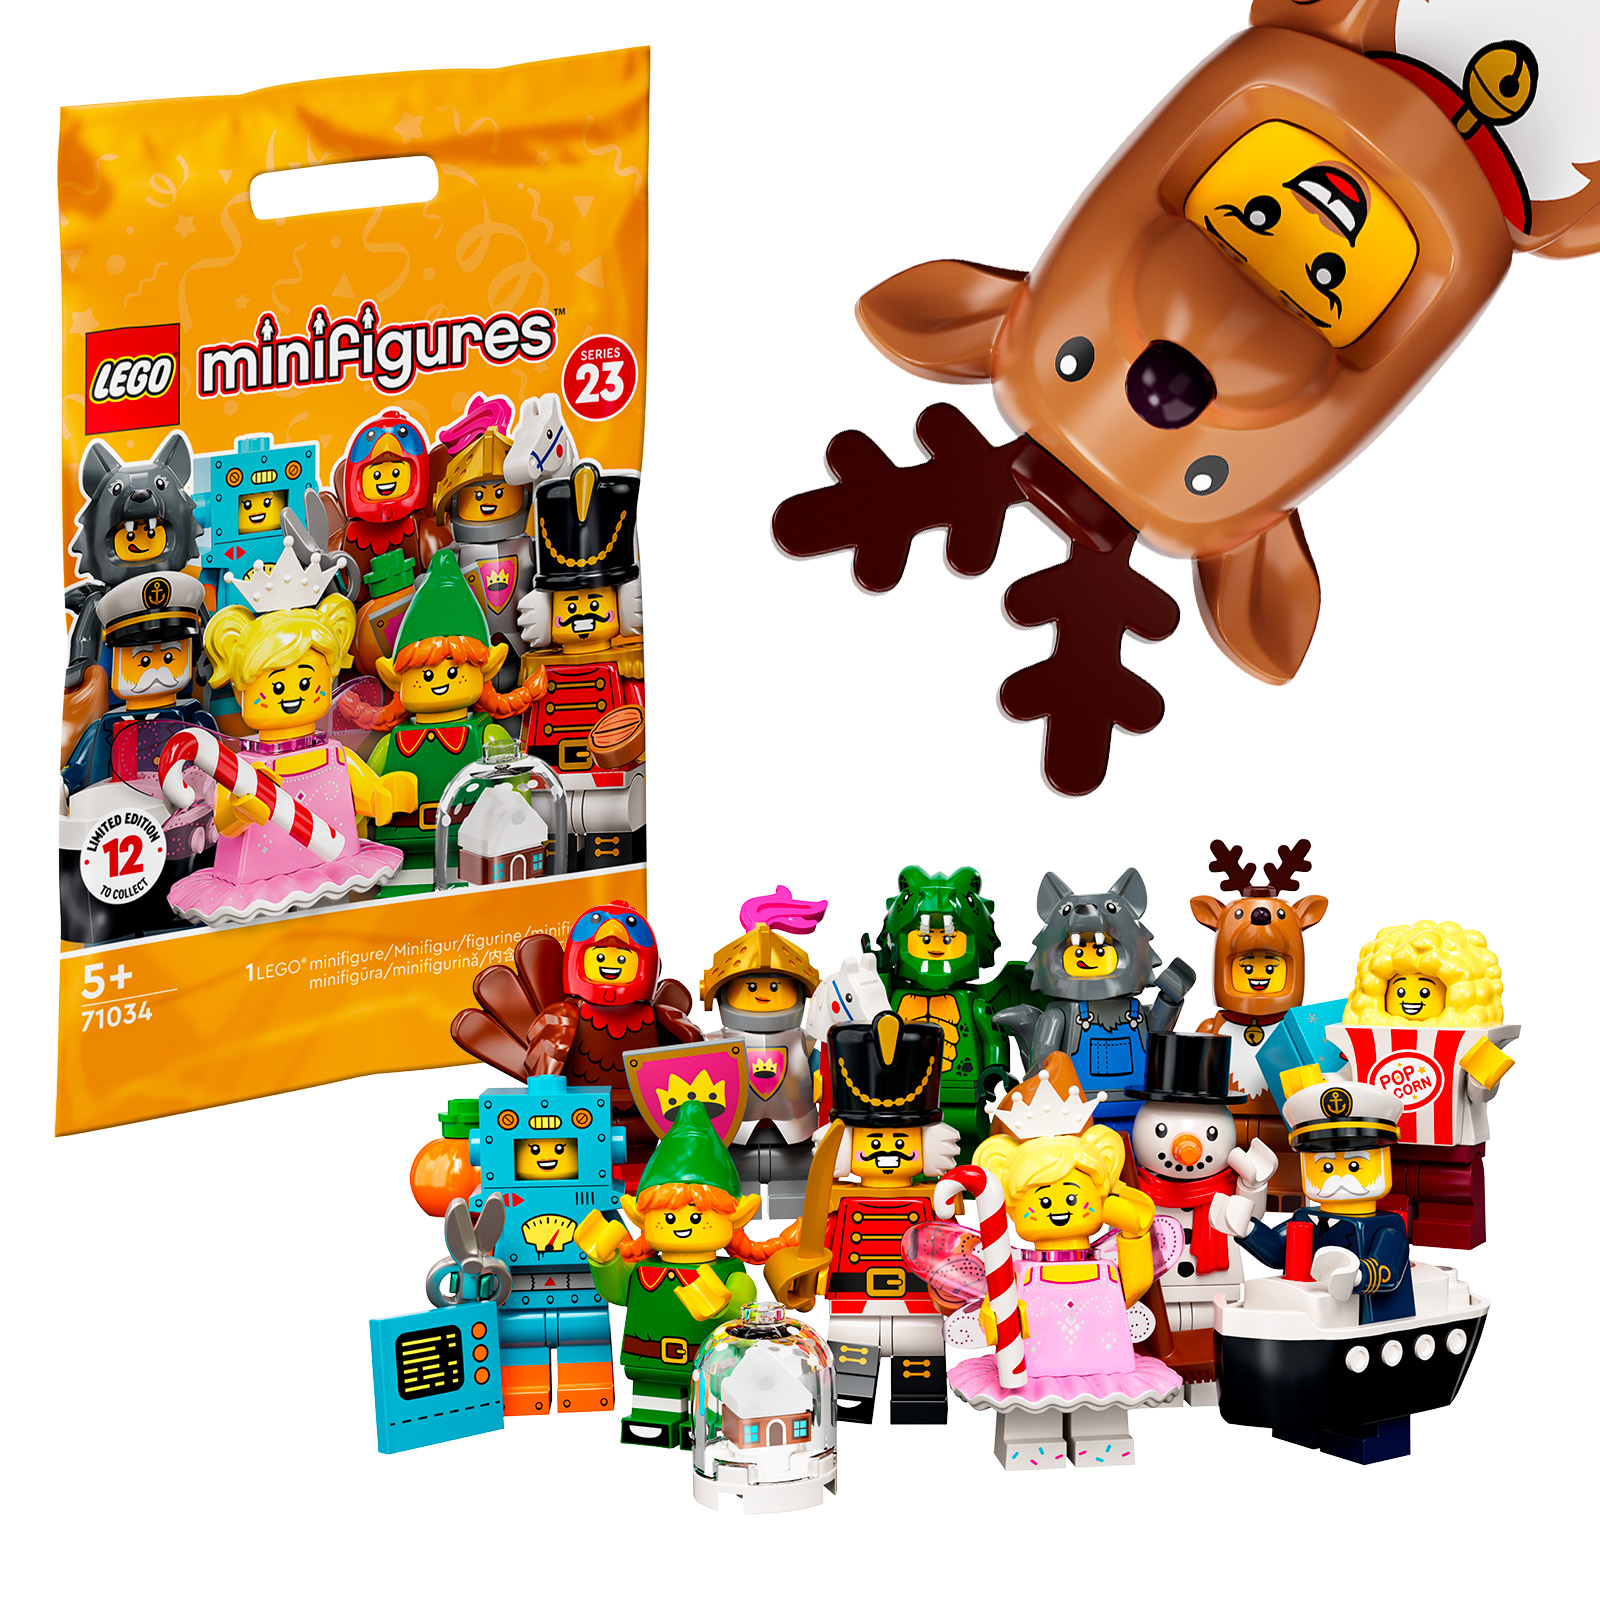 LEGO 71034 Collectible Minifigures Series 23: all the characters are on the Shop